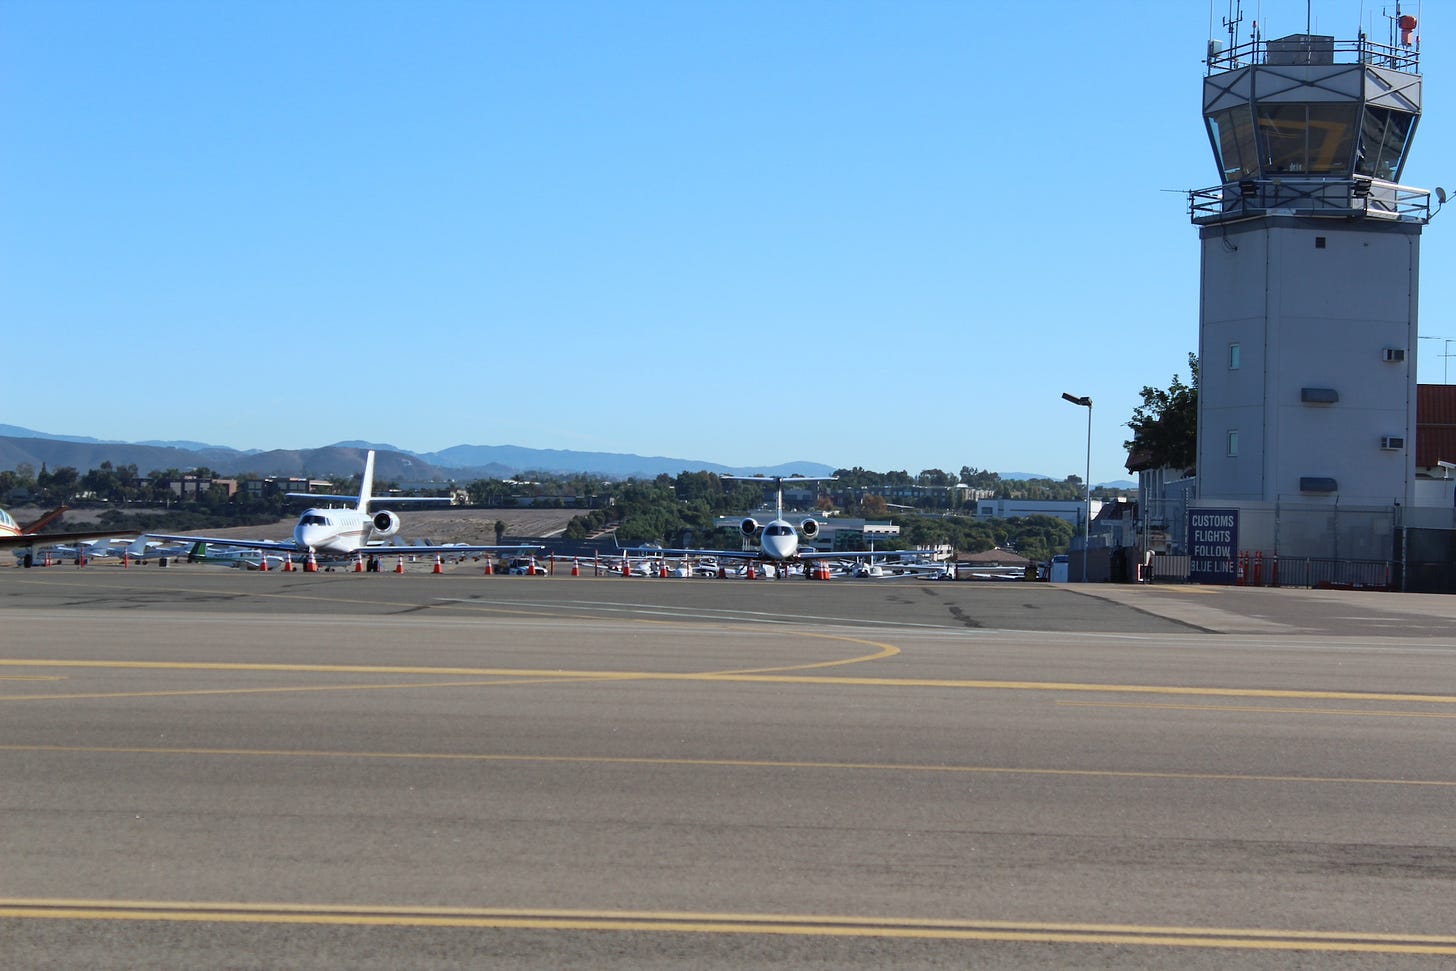 The Carlsbad City Council approved a proposal from a resident group to amend city codes and the General Plan regarding McClellan-Palomar Airport. San Diego County, which owns the airport, sent a letter to the city challenging the authority and legality of the City Council’s actions. File photo